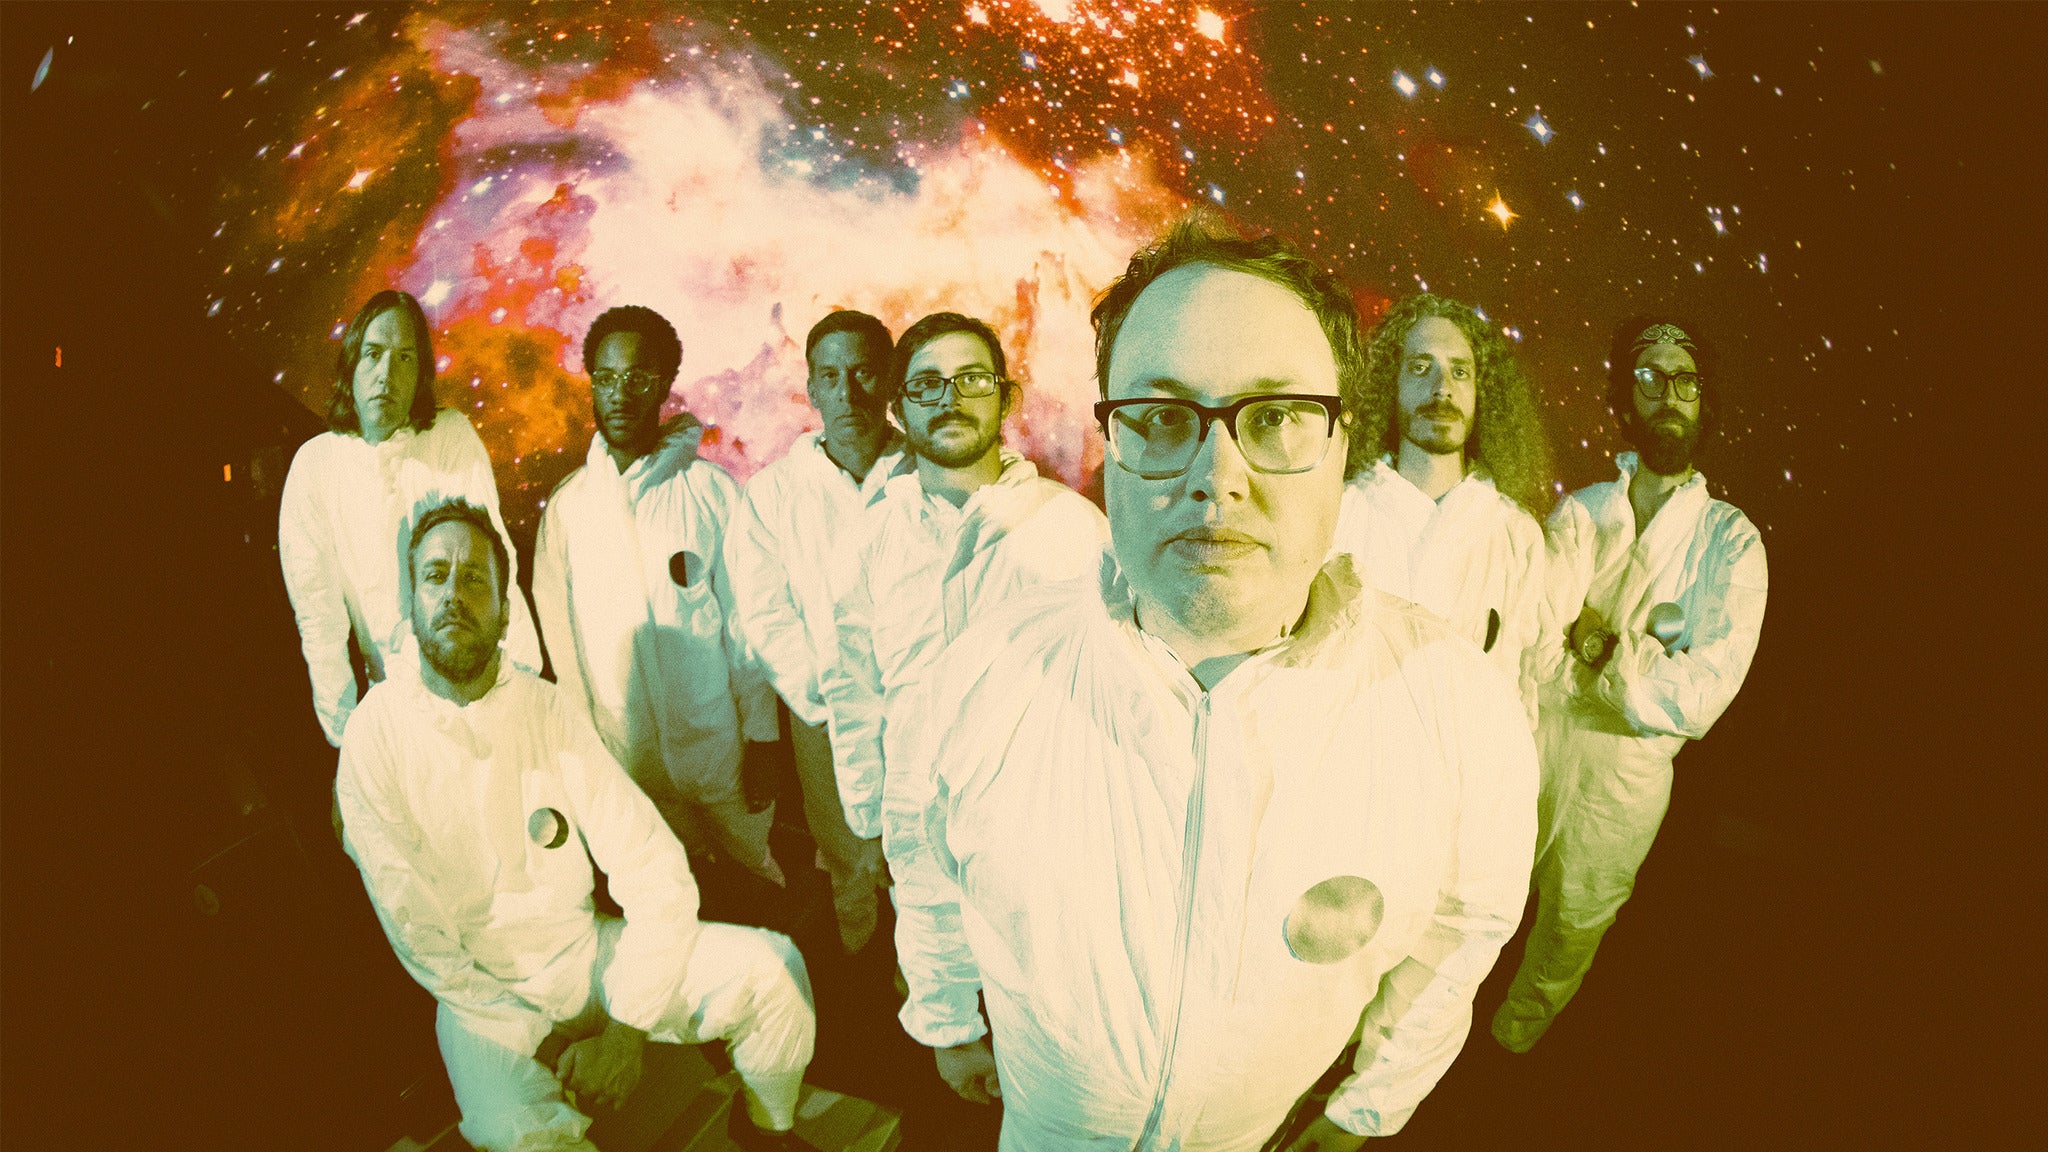 St. Paul and the Broken Bones at Soul Kitchen